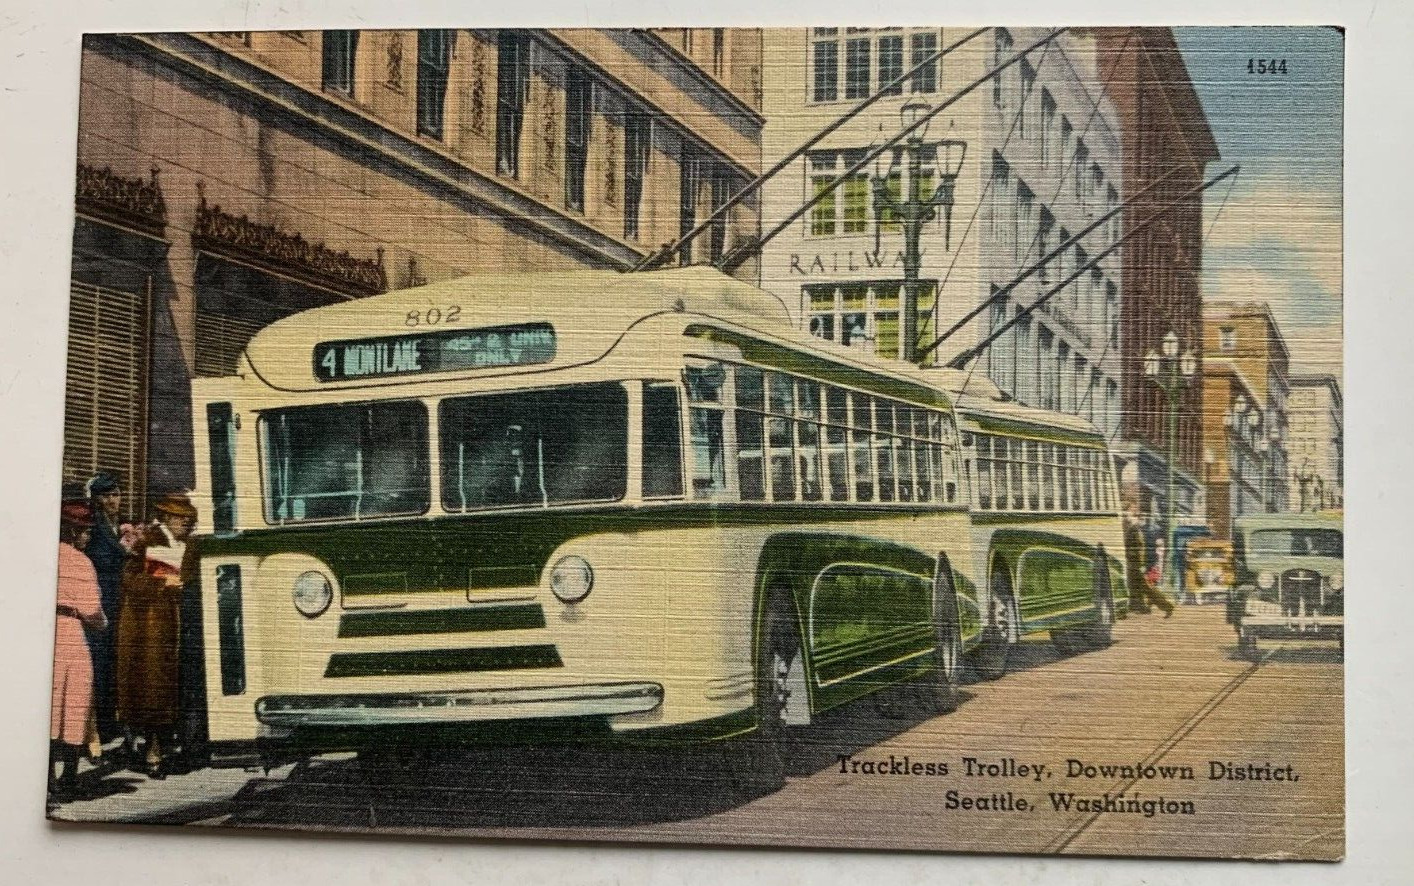 ca 1940s WA Postcard Seattle Downtown District Trackless Trolley Bus Motor Coach